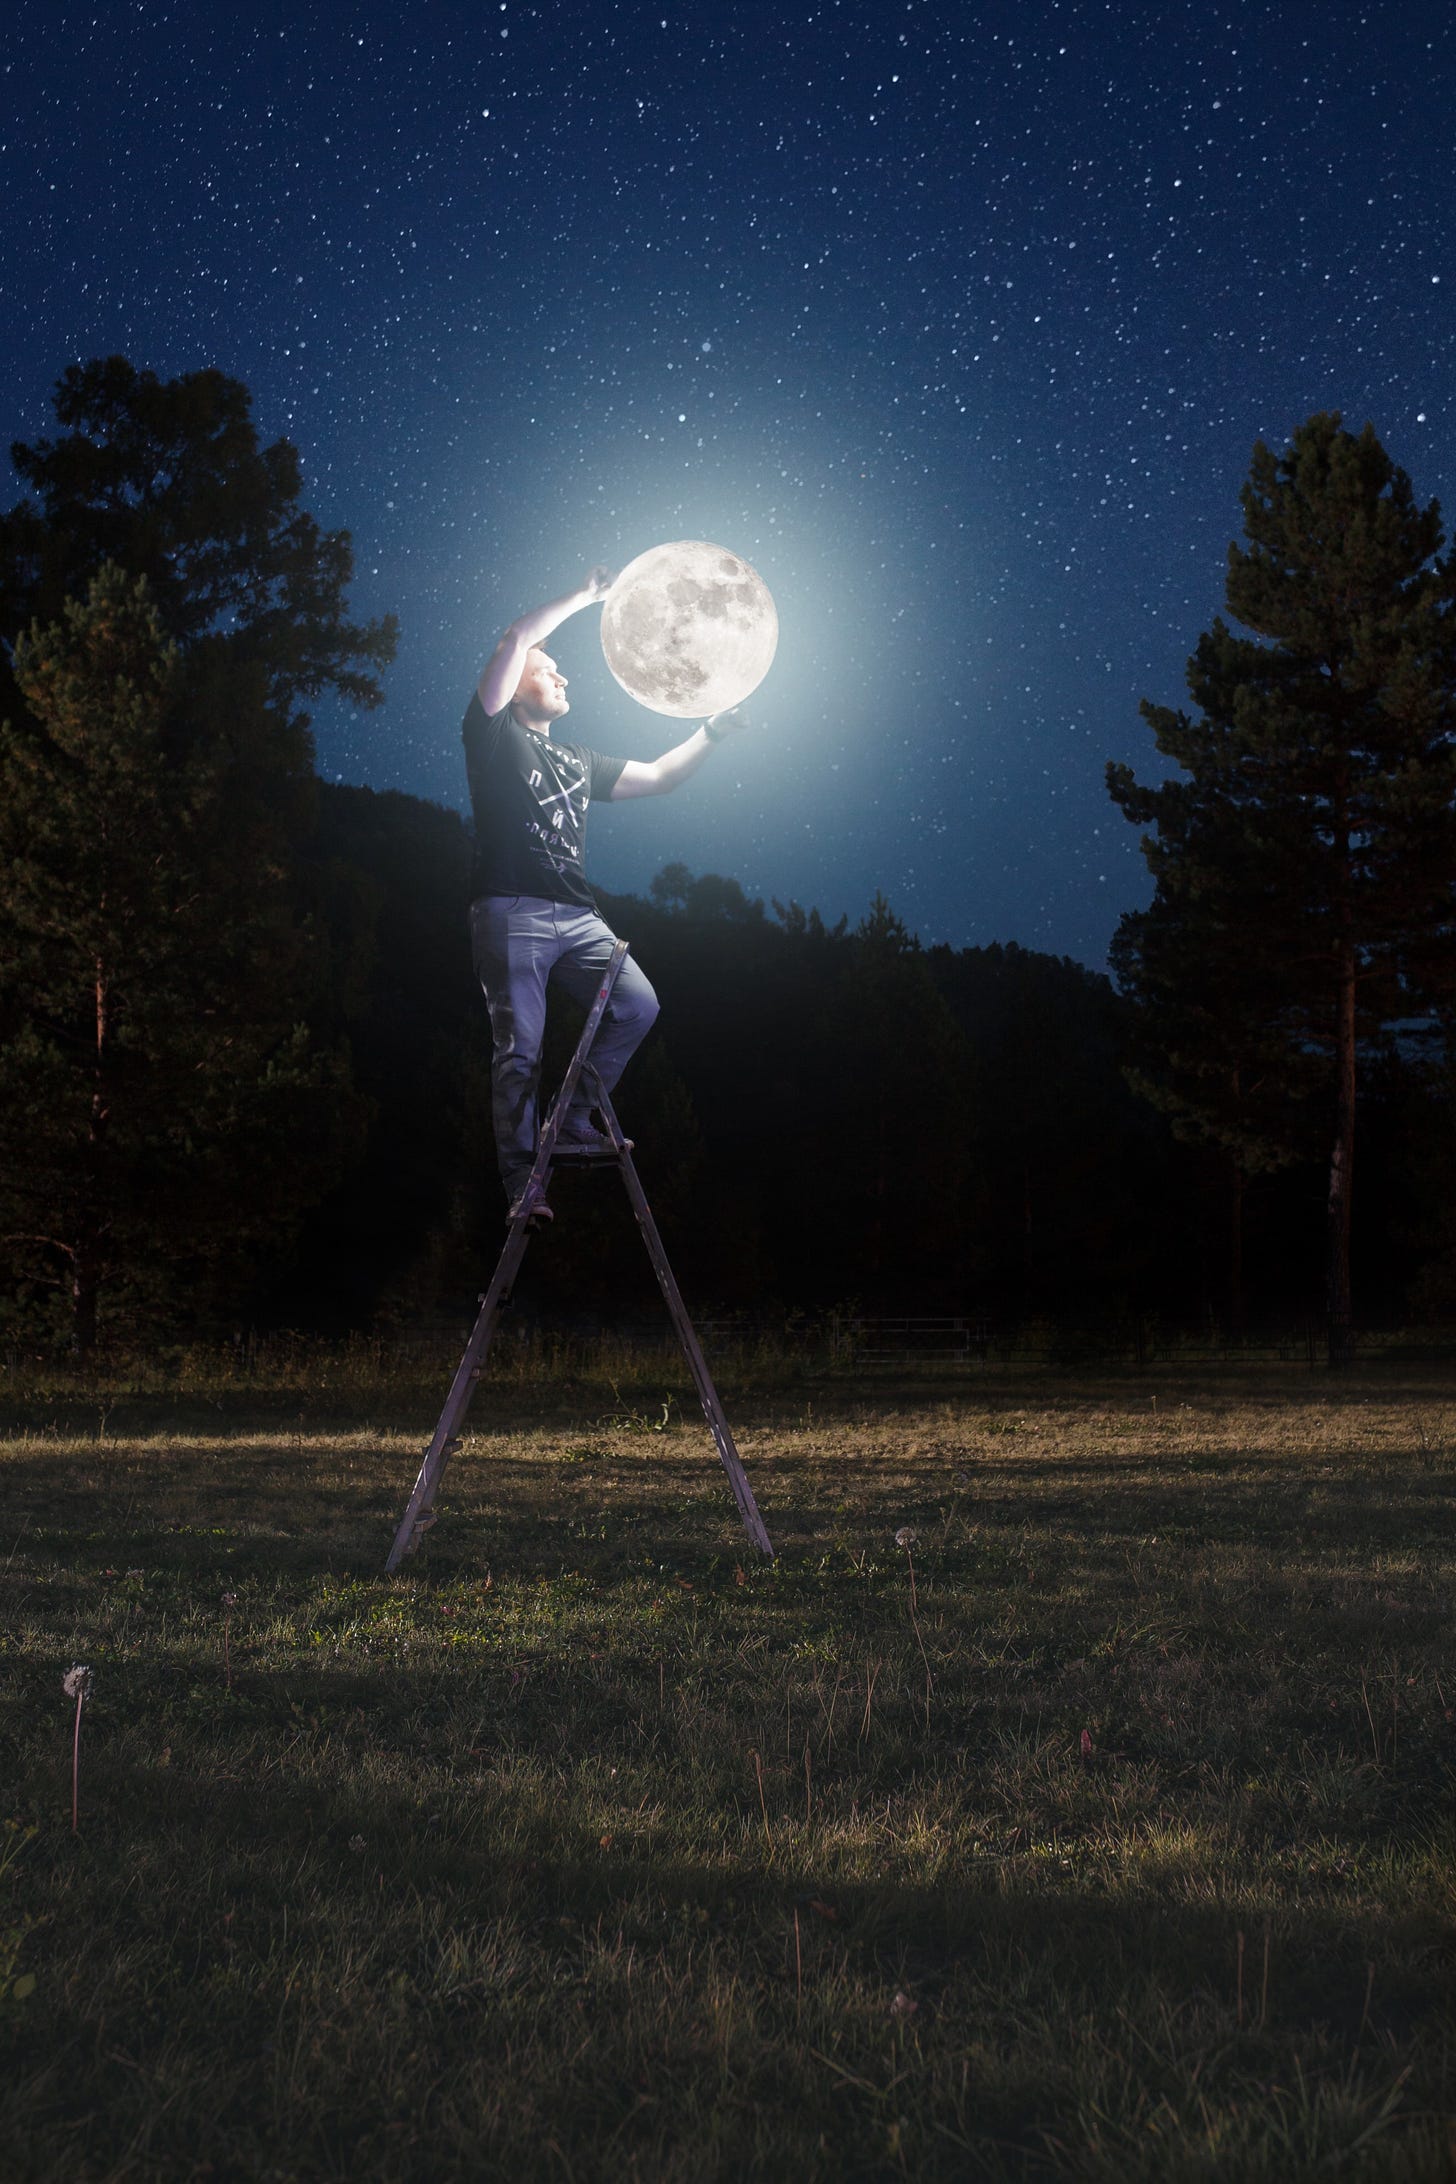 A man on a ladder poses so it appears he is holding the moon in his arms.